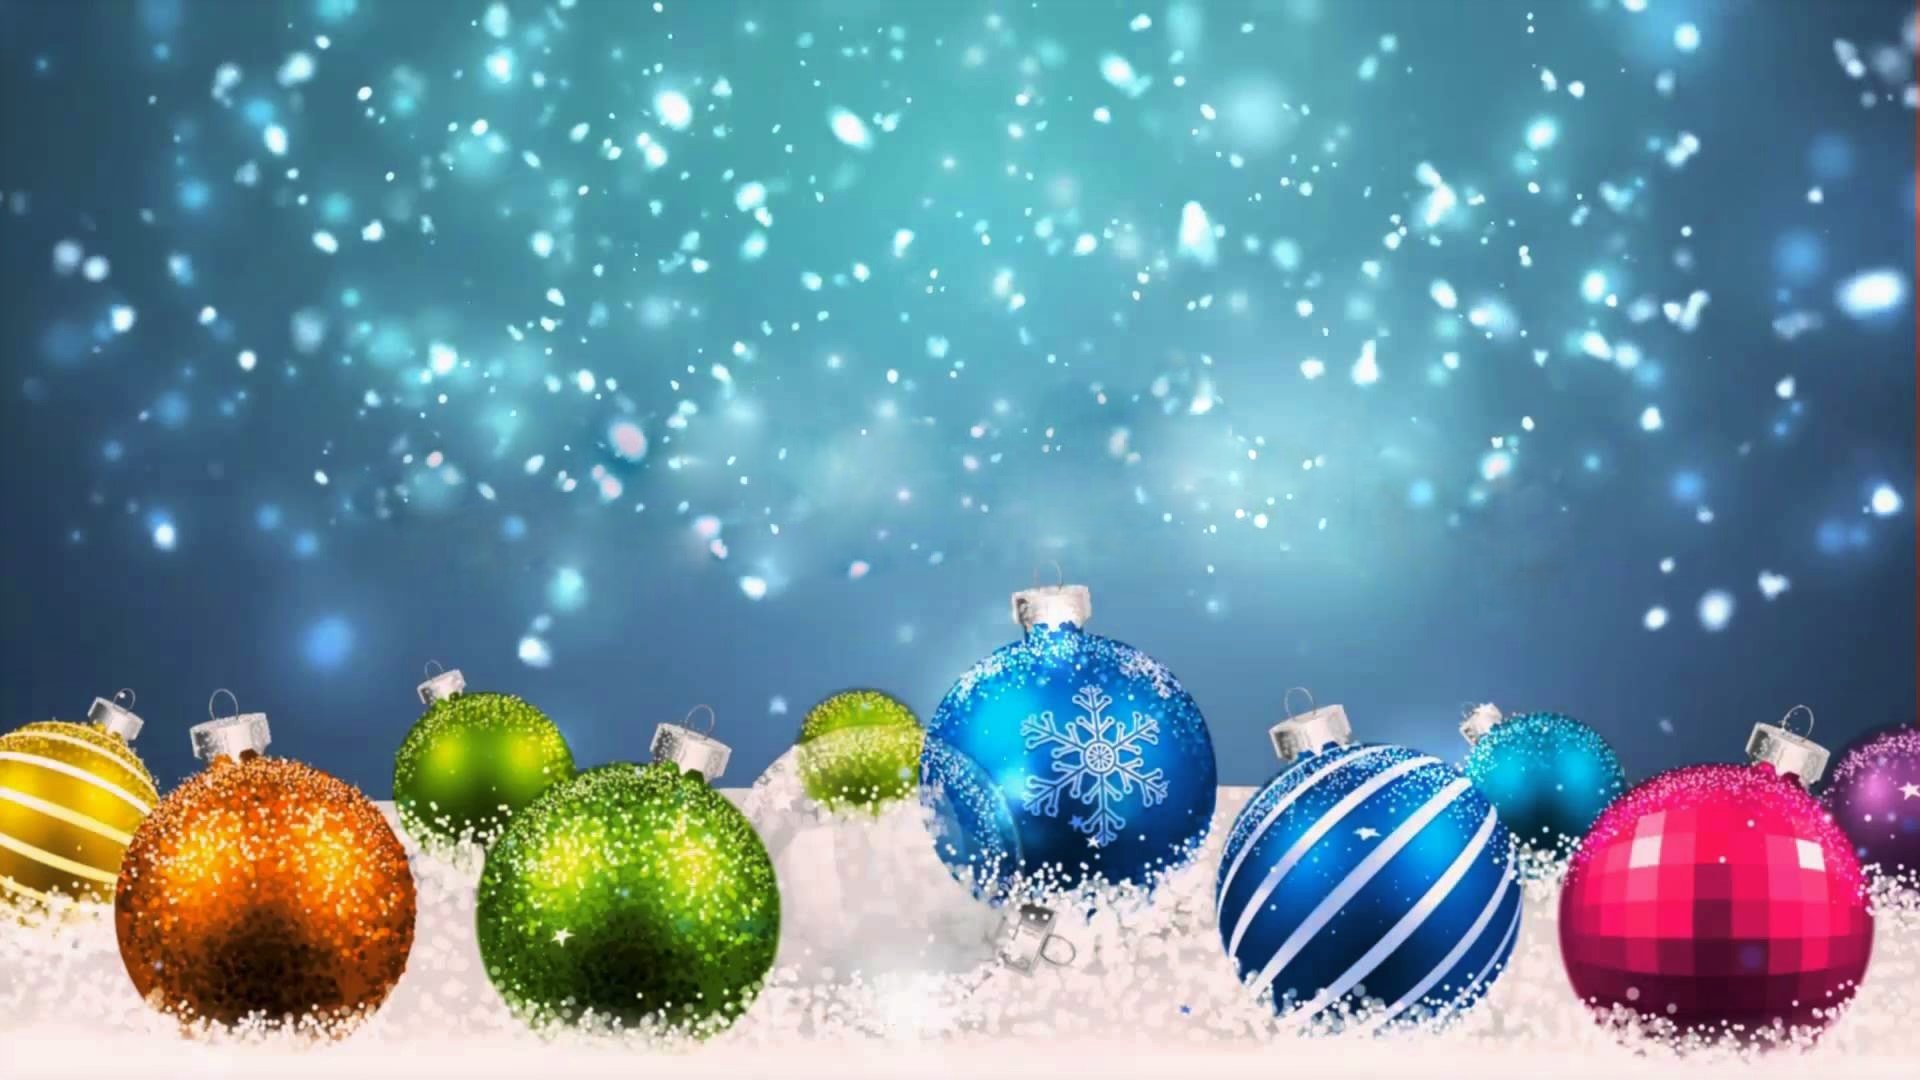 christmas background wallpaper hd holy blue and green